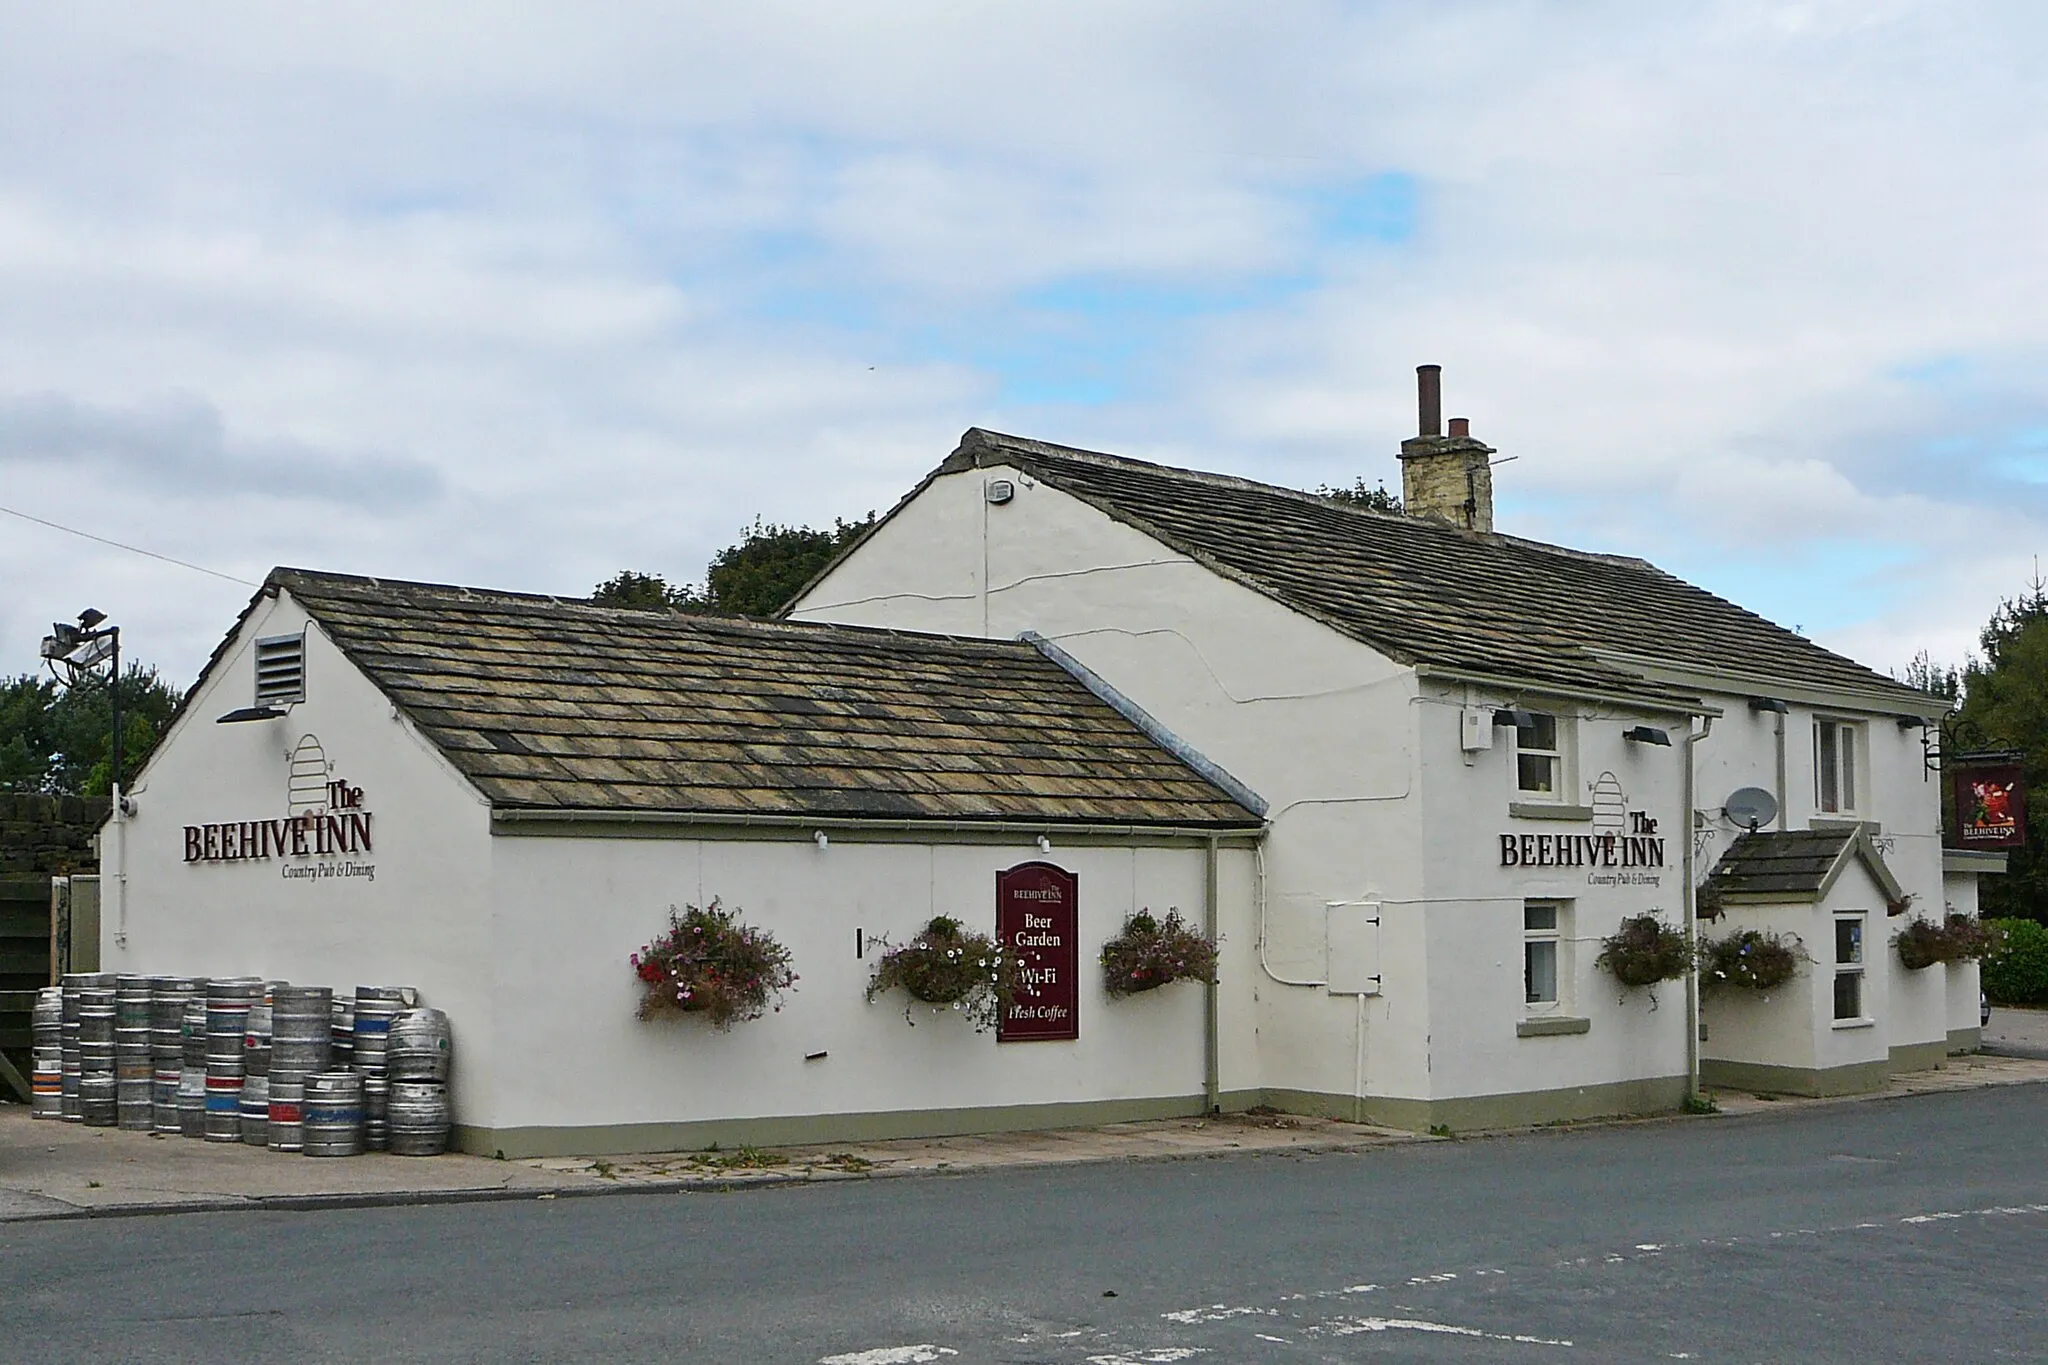 Photo showing: The Beehive Inn, Ripponden, West Yorkshire.  Taken on Sunday the 26th of September 2010.